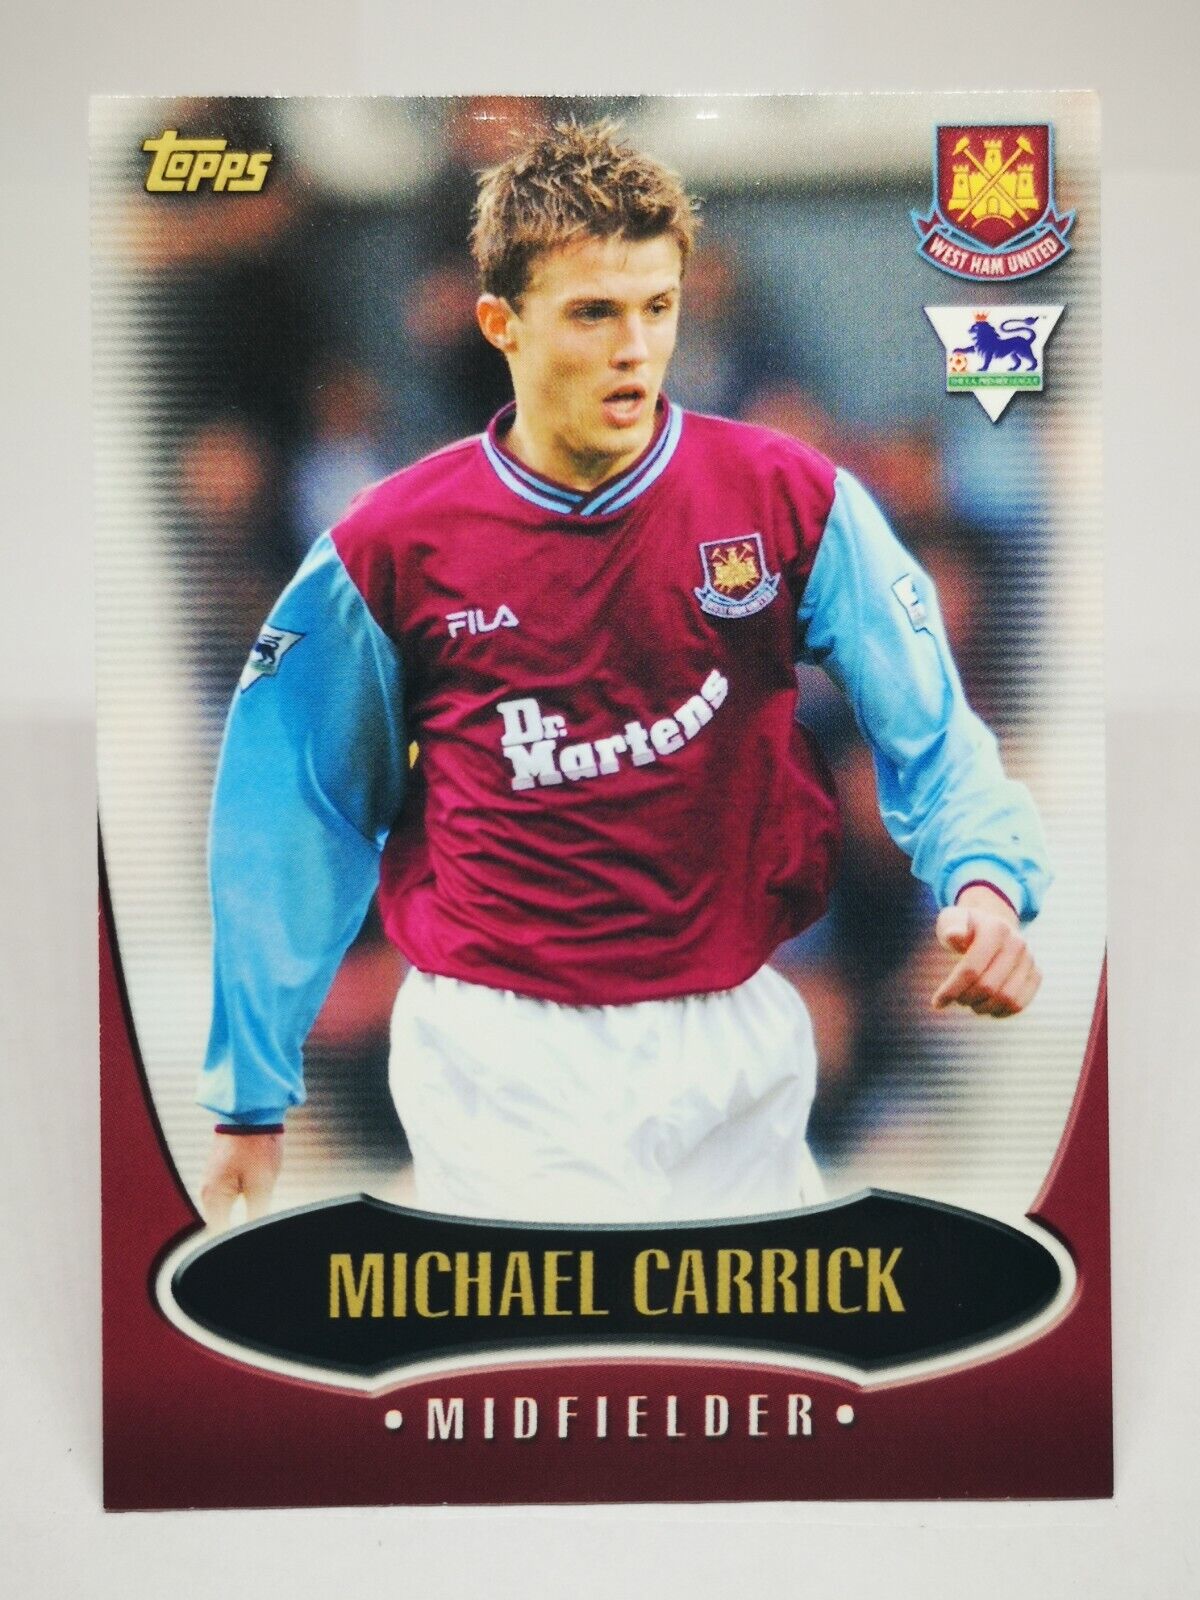 2003 Topps C16 Premier Gold 2003 Card #WH1 Michael Carrick West Ham United